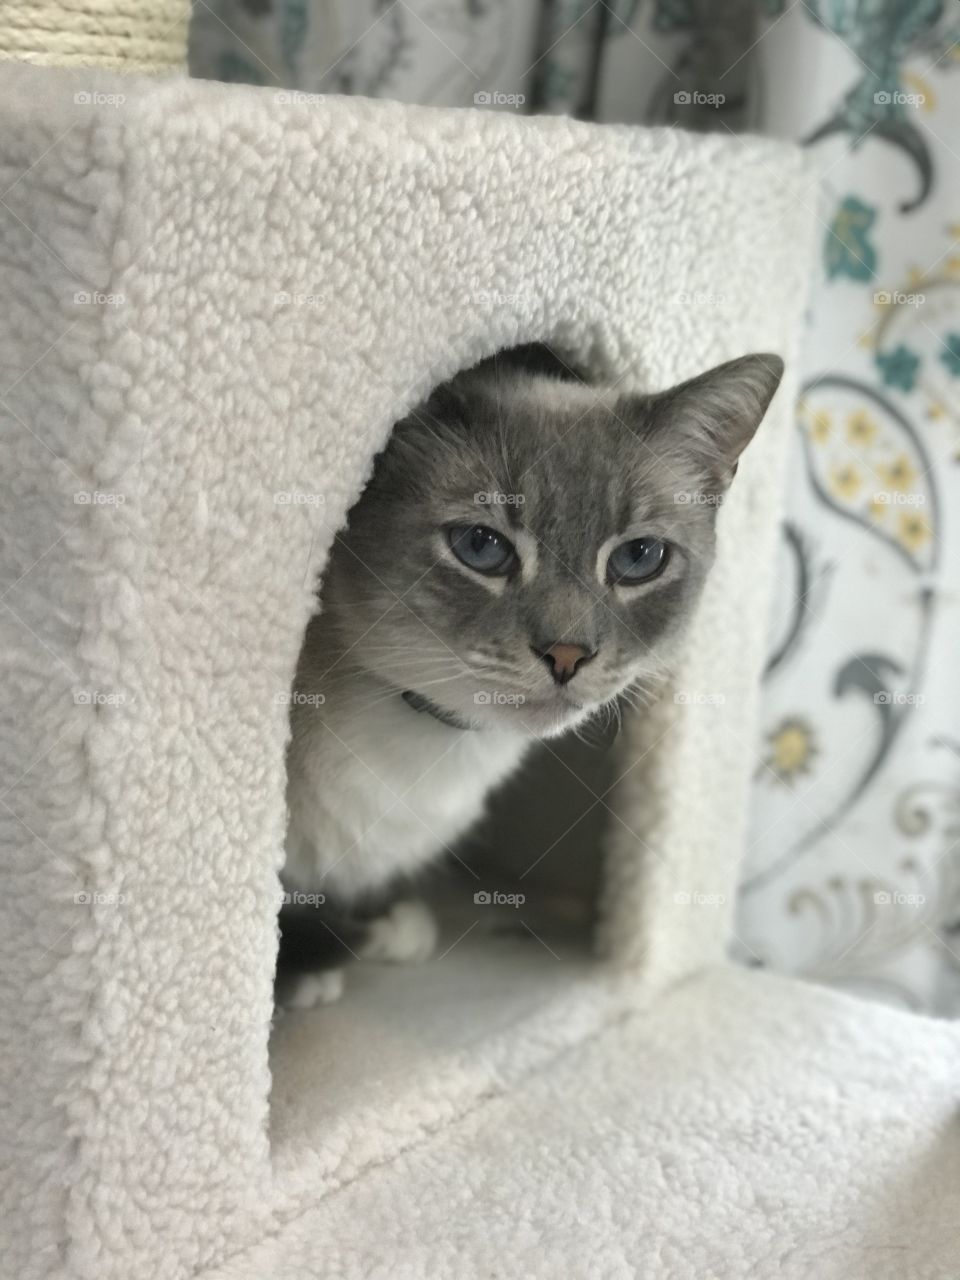 Oscar peeping out of his cat tree. Blue eyed cat asking what do you want? 